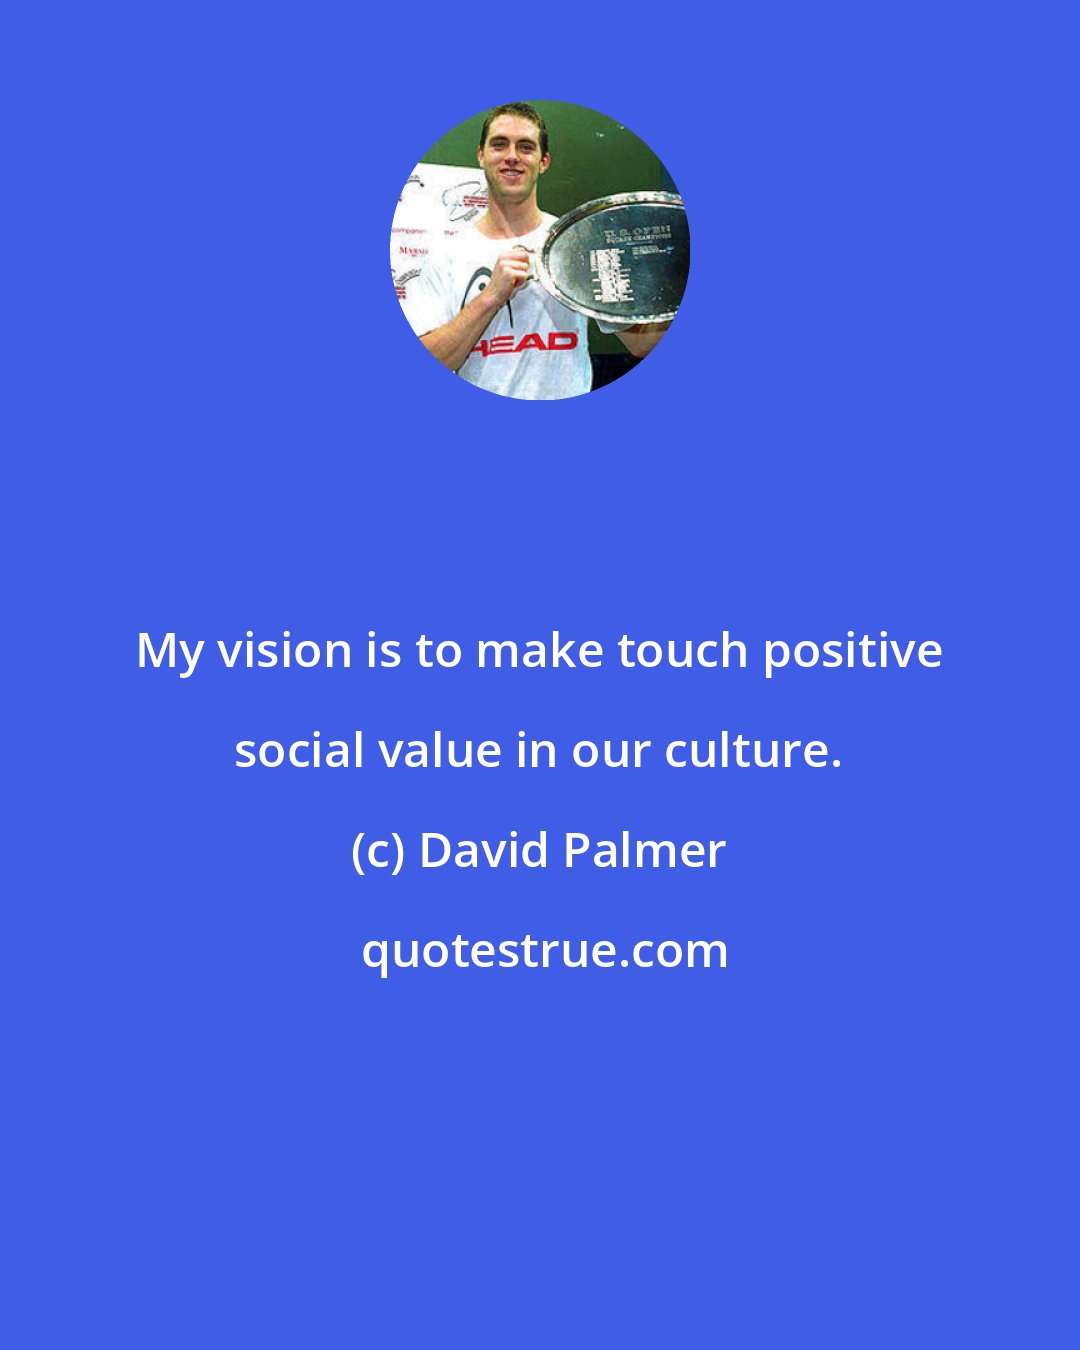 David Palmer: My vision is to make touch positive social value in our culture.